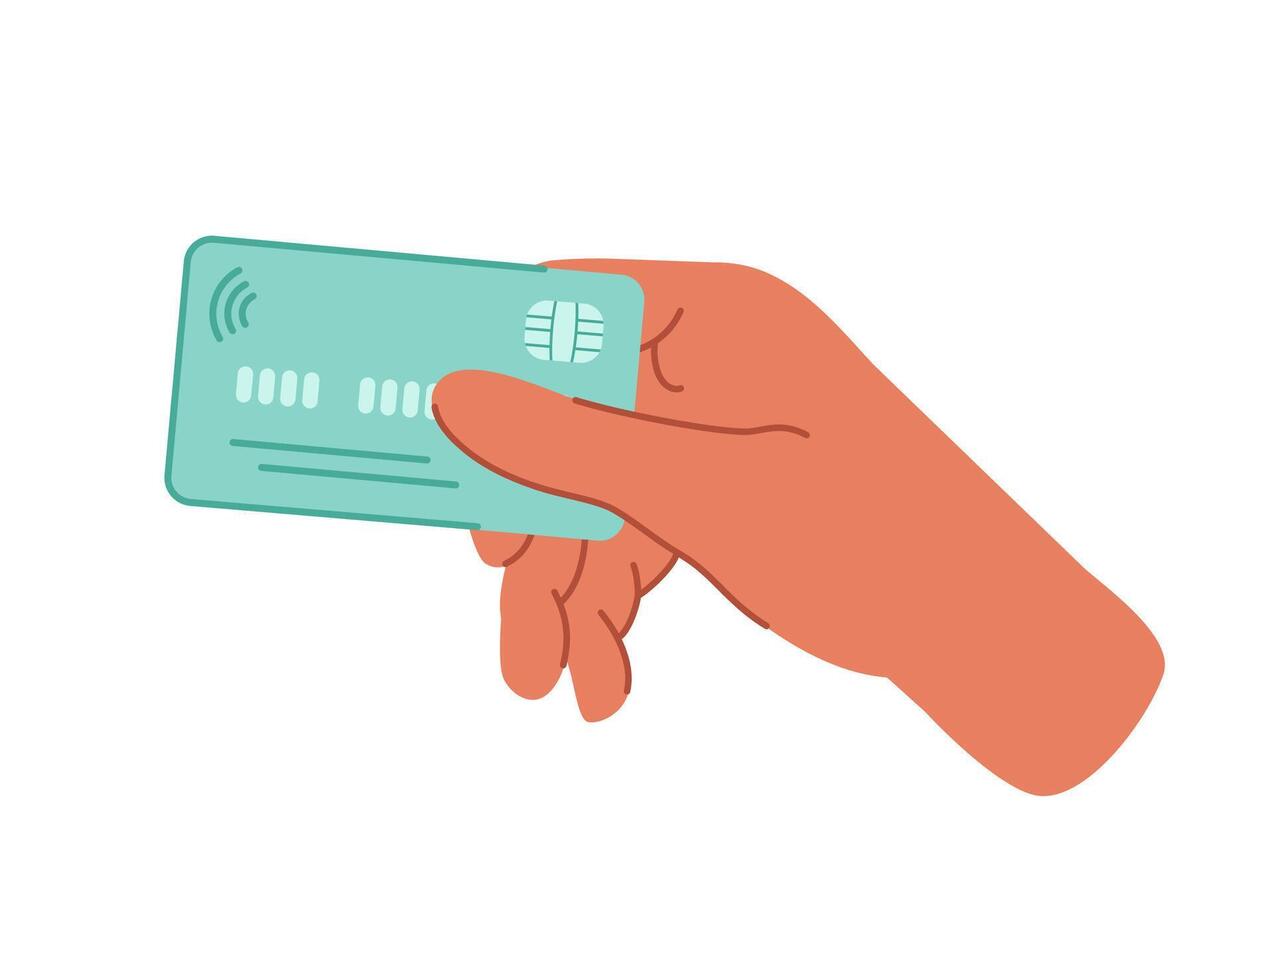 Hands holding a credit or debit card. Pay for purchases by card, bank transfer. Spend money, pay for purchases. Financial concept hand drawn illustration isolated on white background. vector